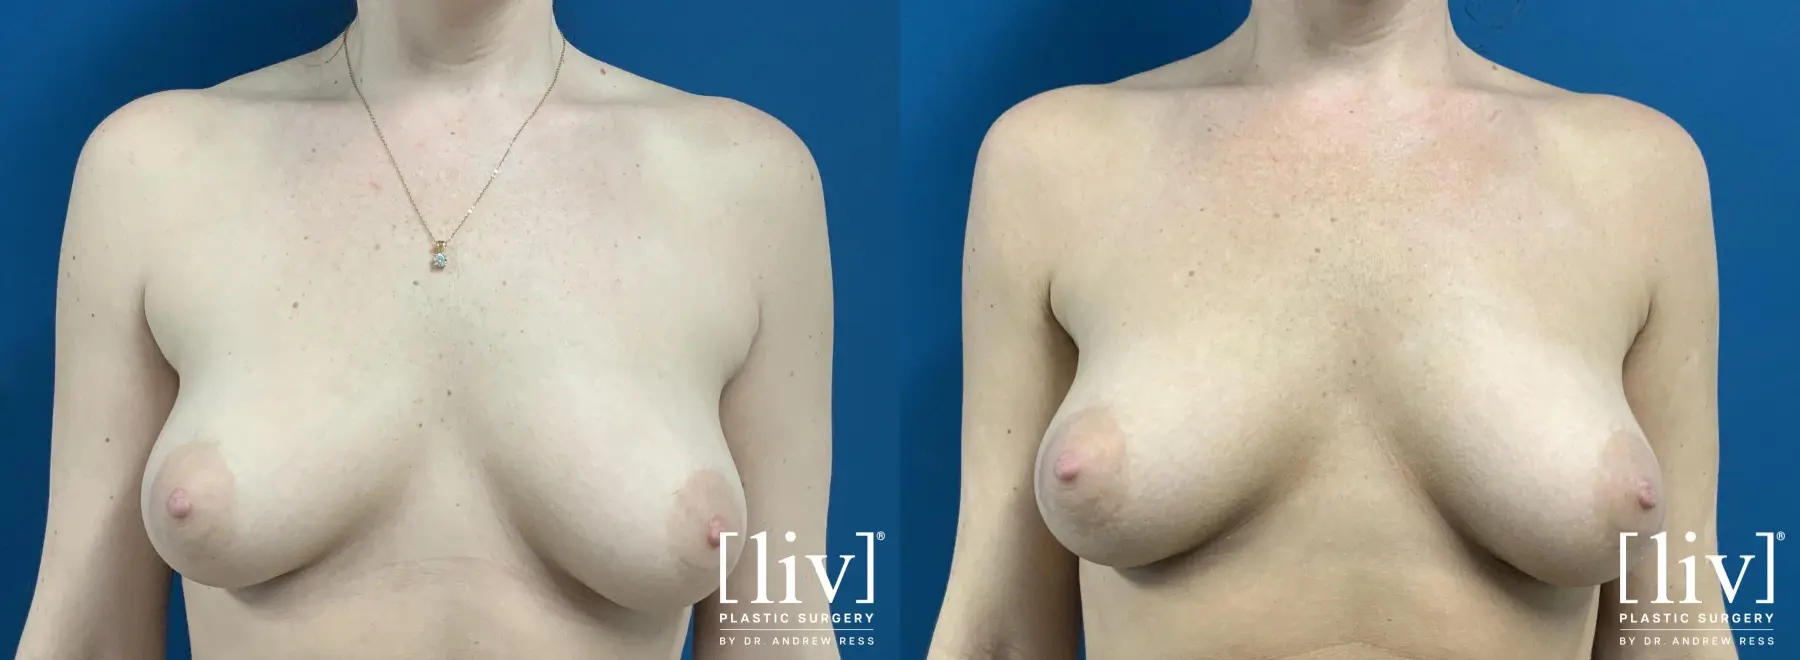 Bra-Fat Liposuction - Before and After 1